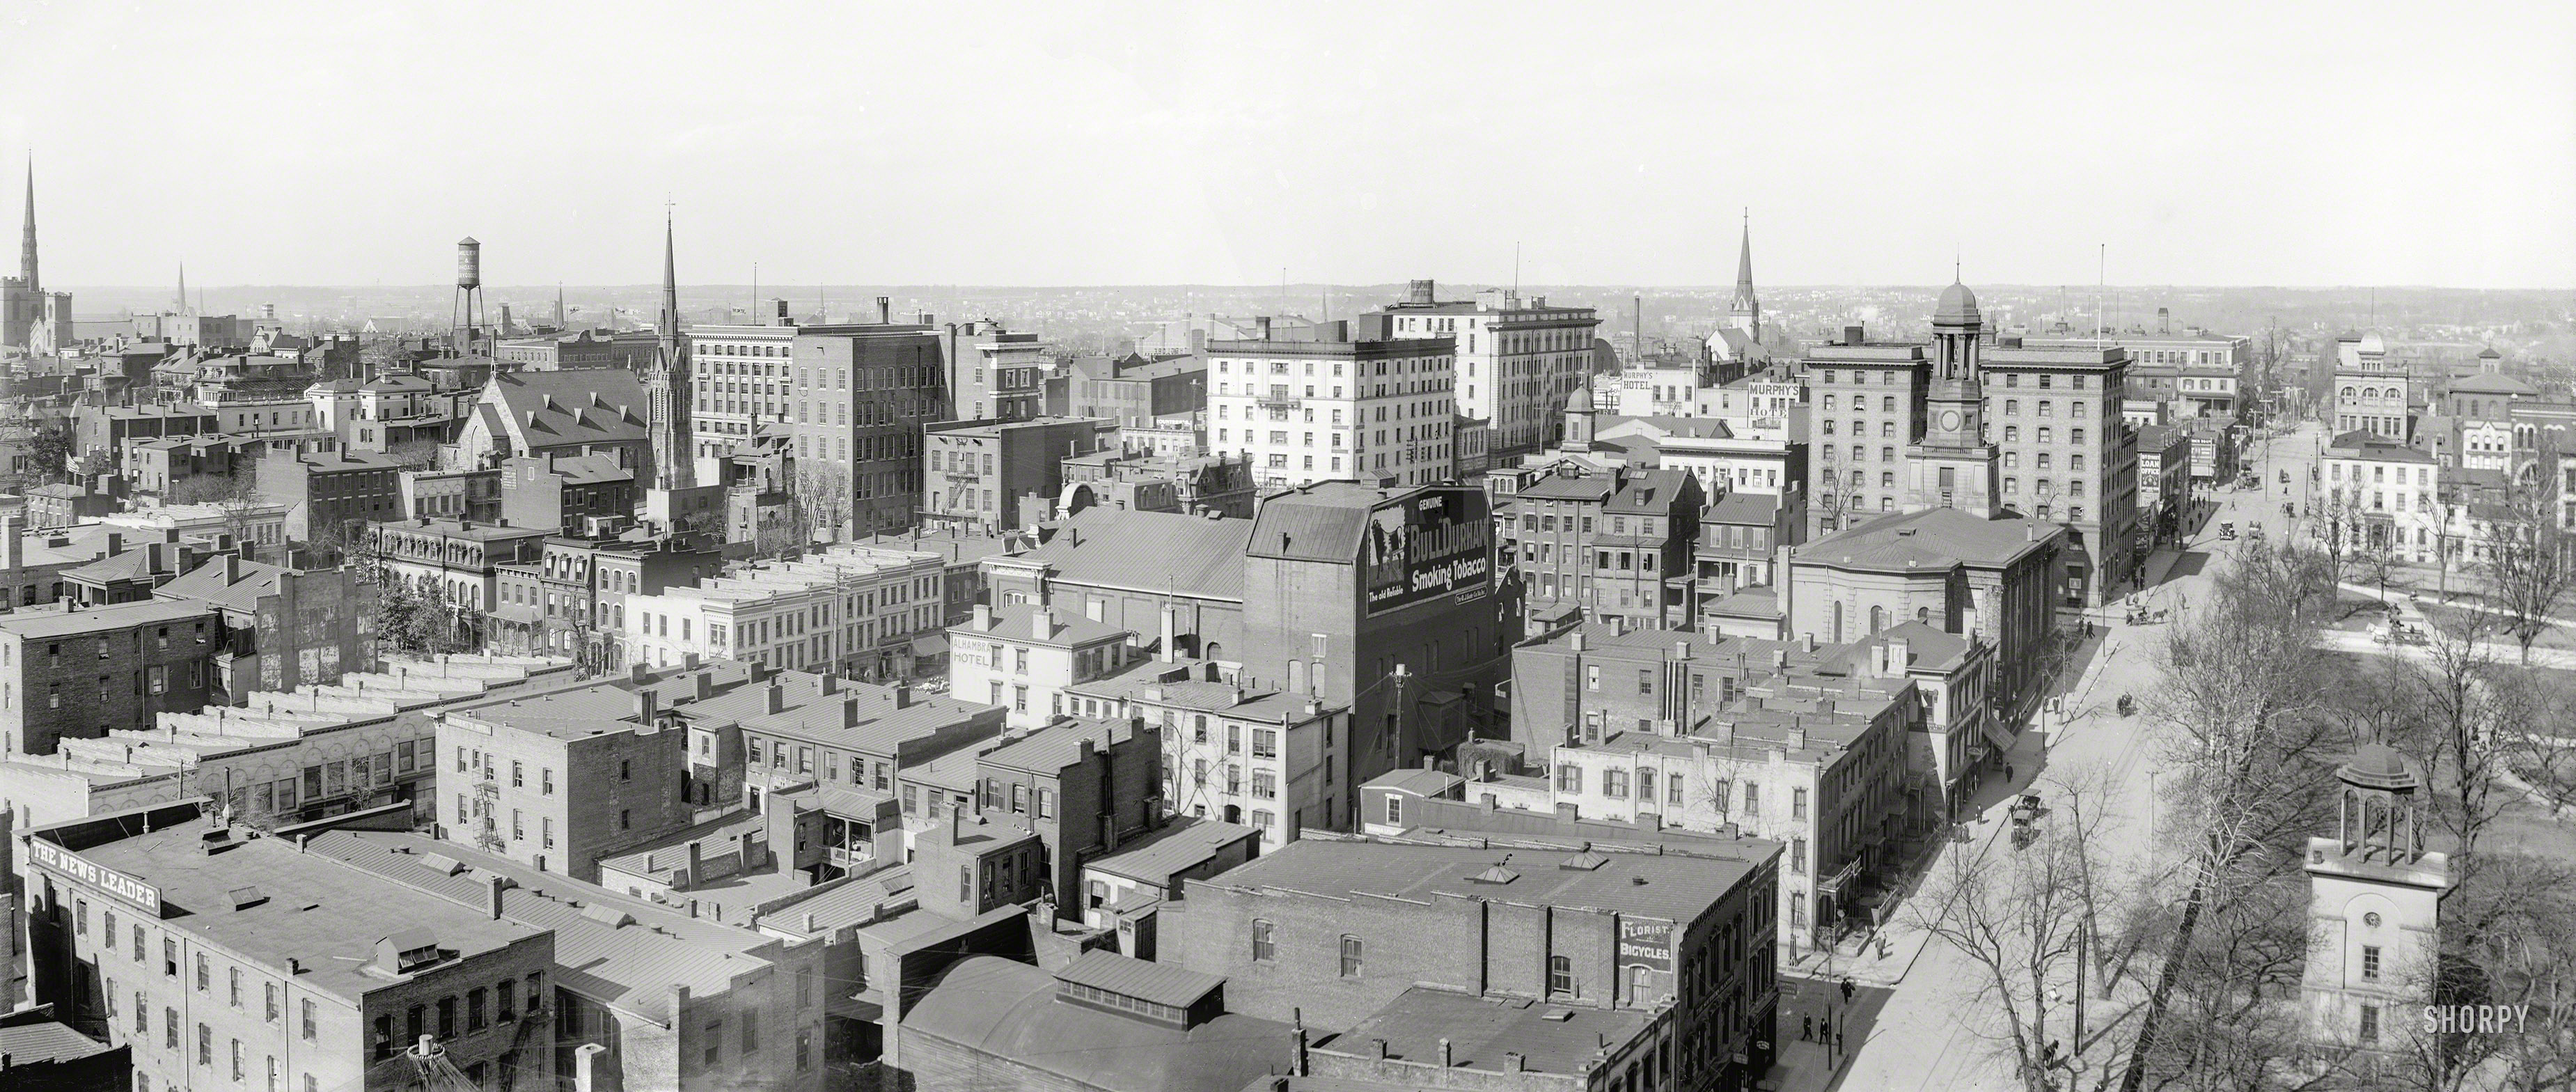 The Old Dominion circa 1912. "Richmond, Virginia, panorama." Made from two 8x10 inch glass negatives. Detroit Publishing Company. View full size.